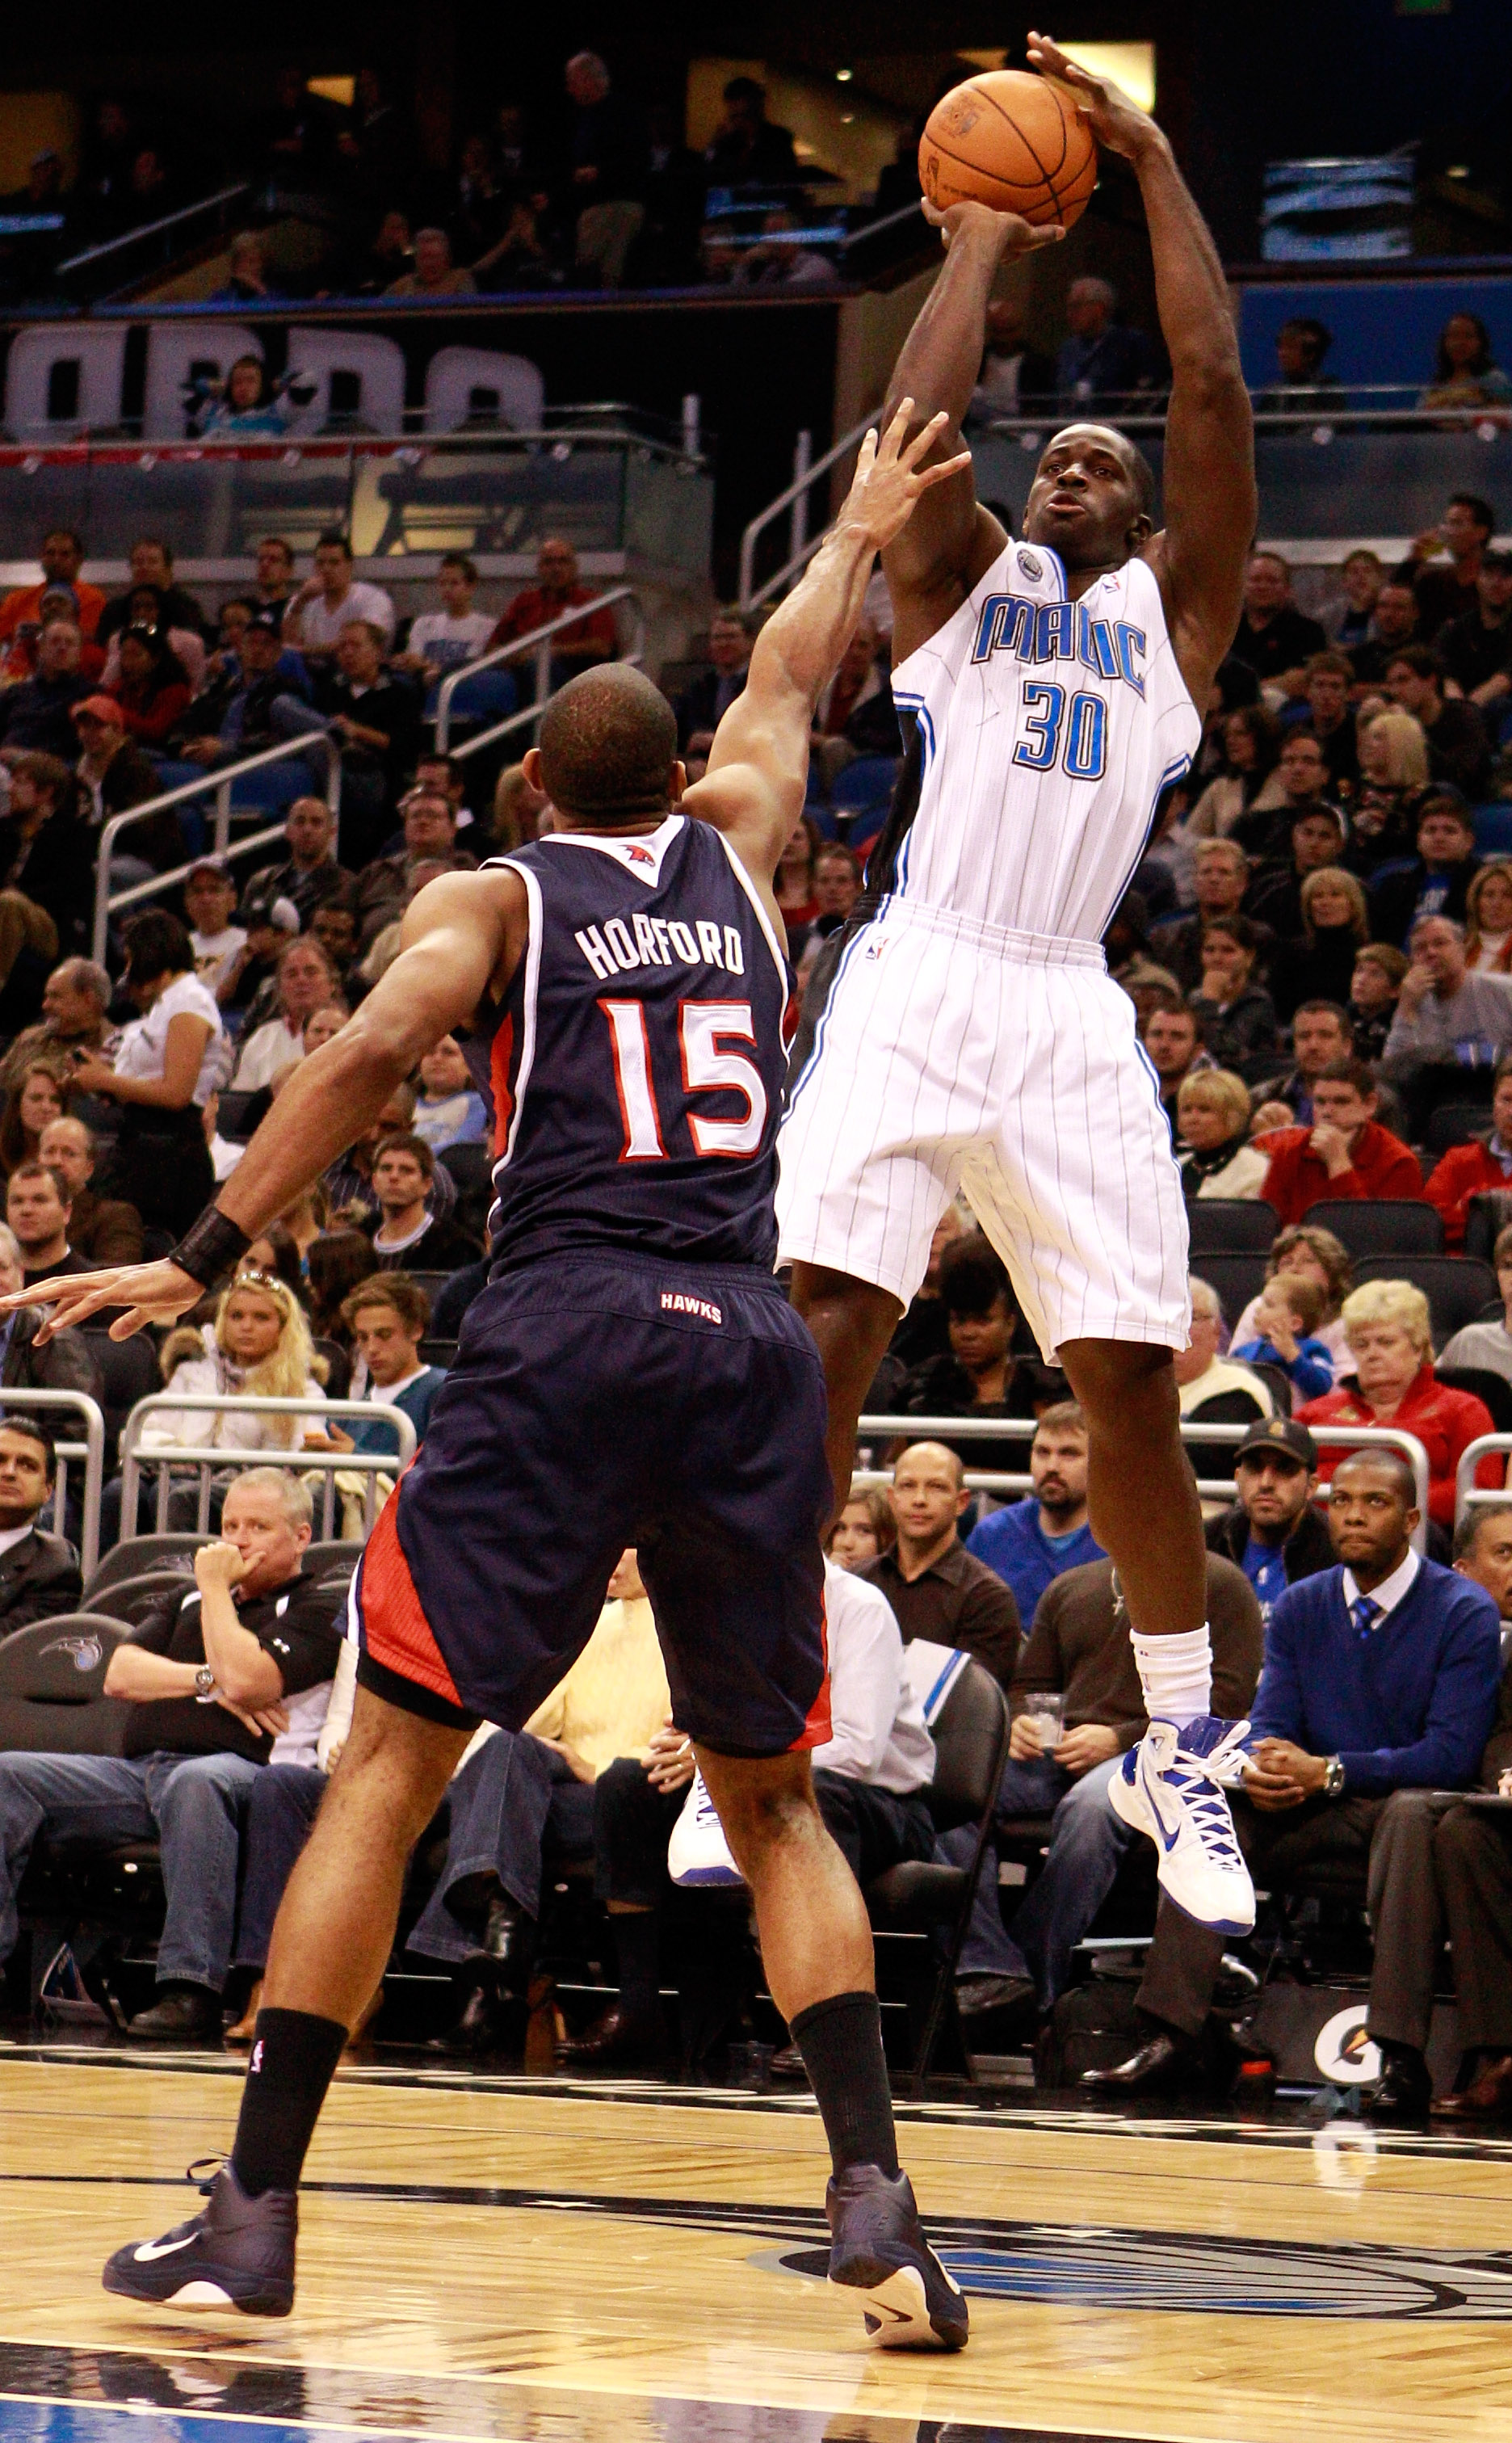 ORLANDO, FL - DECEMBER 06:  Brandon Bass #30 of the Orlando Magic attempts a shot over Al Hoford #15 of the Atlanta Hawks during the game at Amway Arena on December 6, 2010 in Orlando, Florida. NOTE TO USER: User expressly acknowledges and agrees that, by